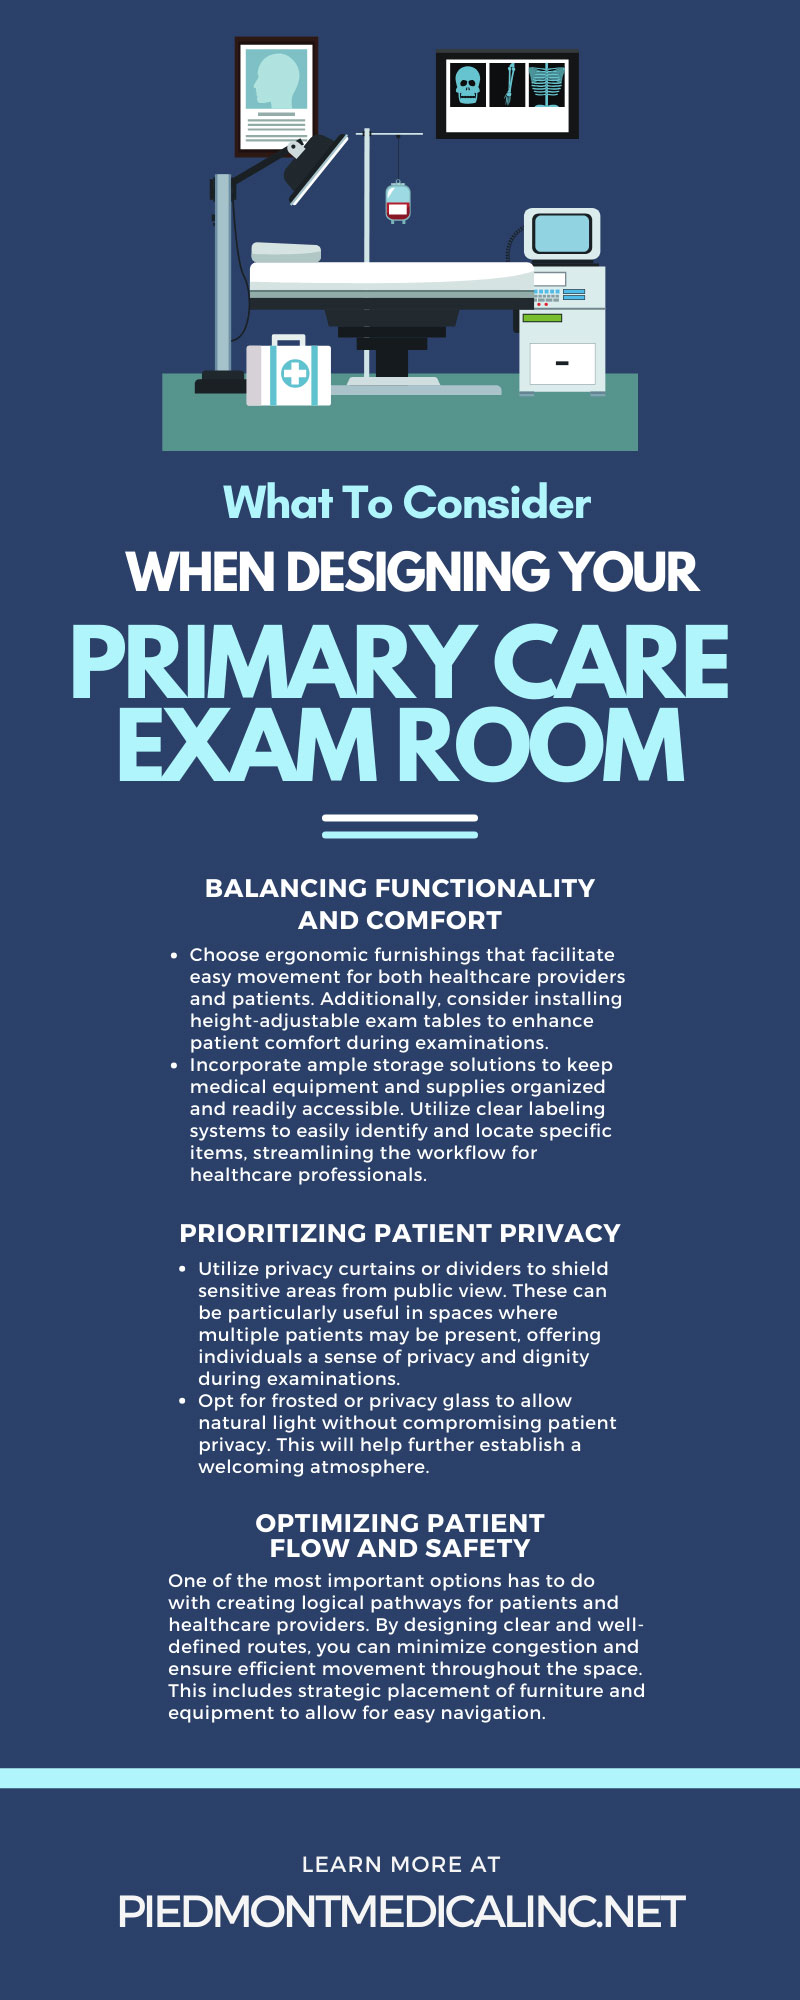 What To Consider When Designing Your Primary Care Exam Room